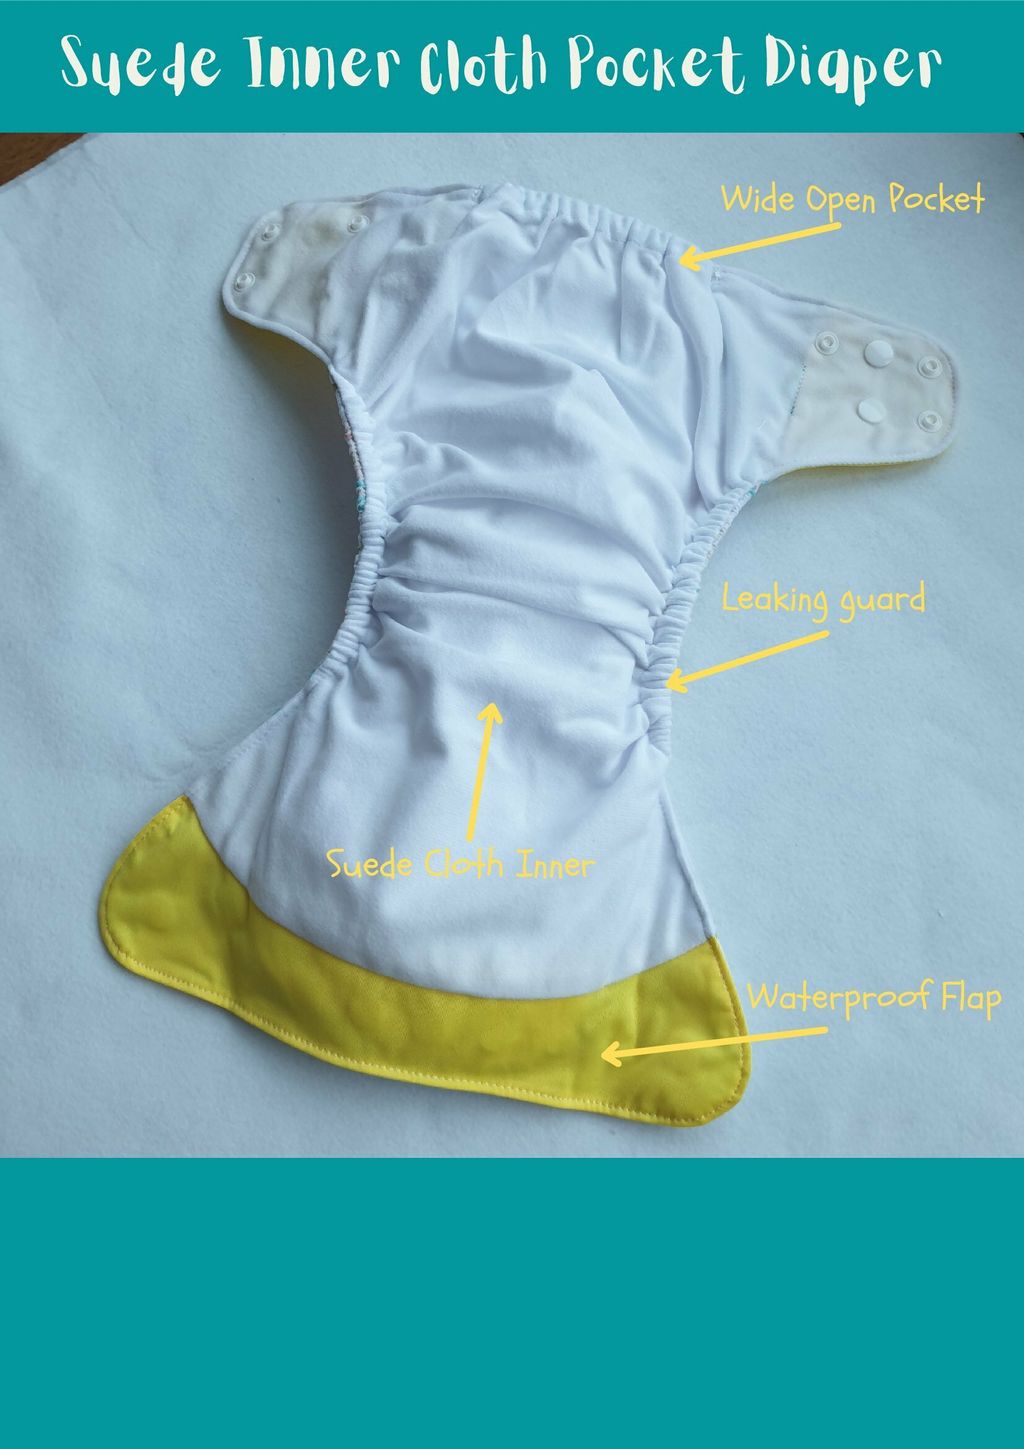 Suede Cloth Diaper Limited Label(inner).jpg